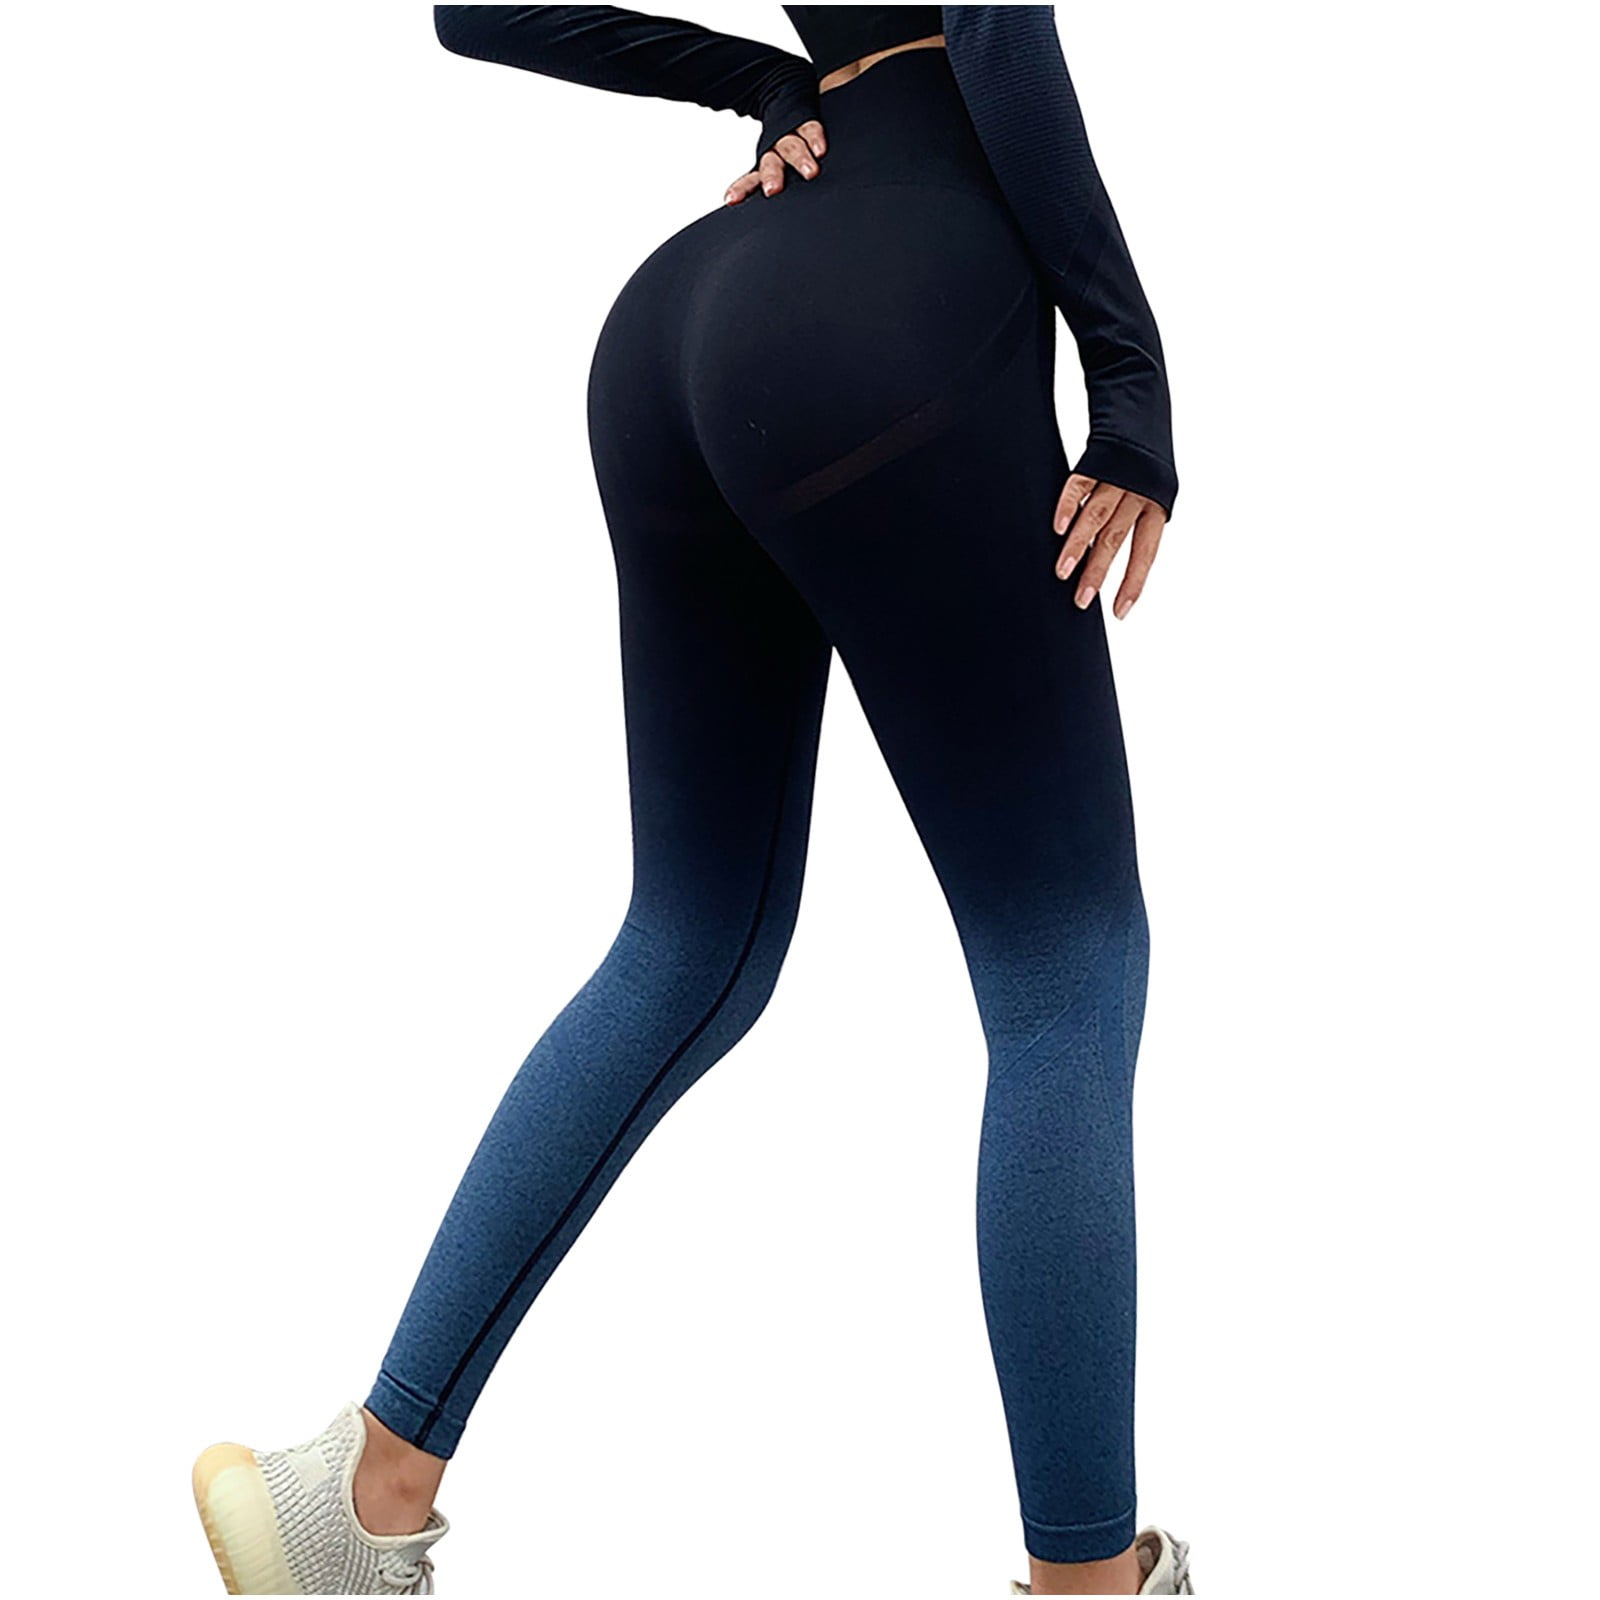 High Waist Push Up Yoga Seamless Workout Leggings For Women Gym Fitness  Workout Sports Wear From Mengyang10, $15.1